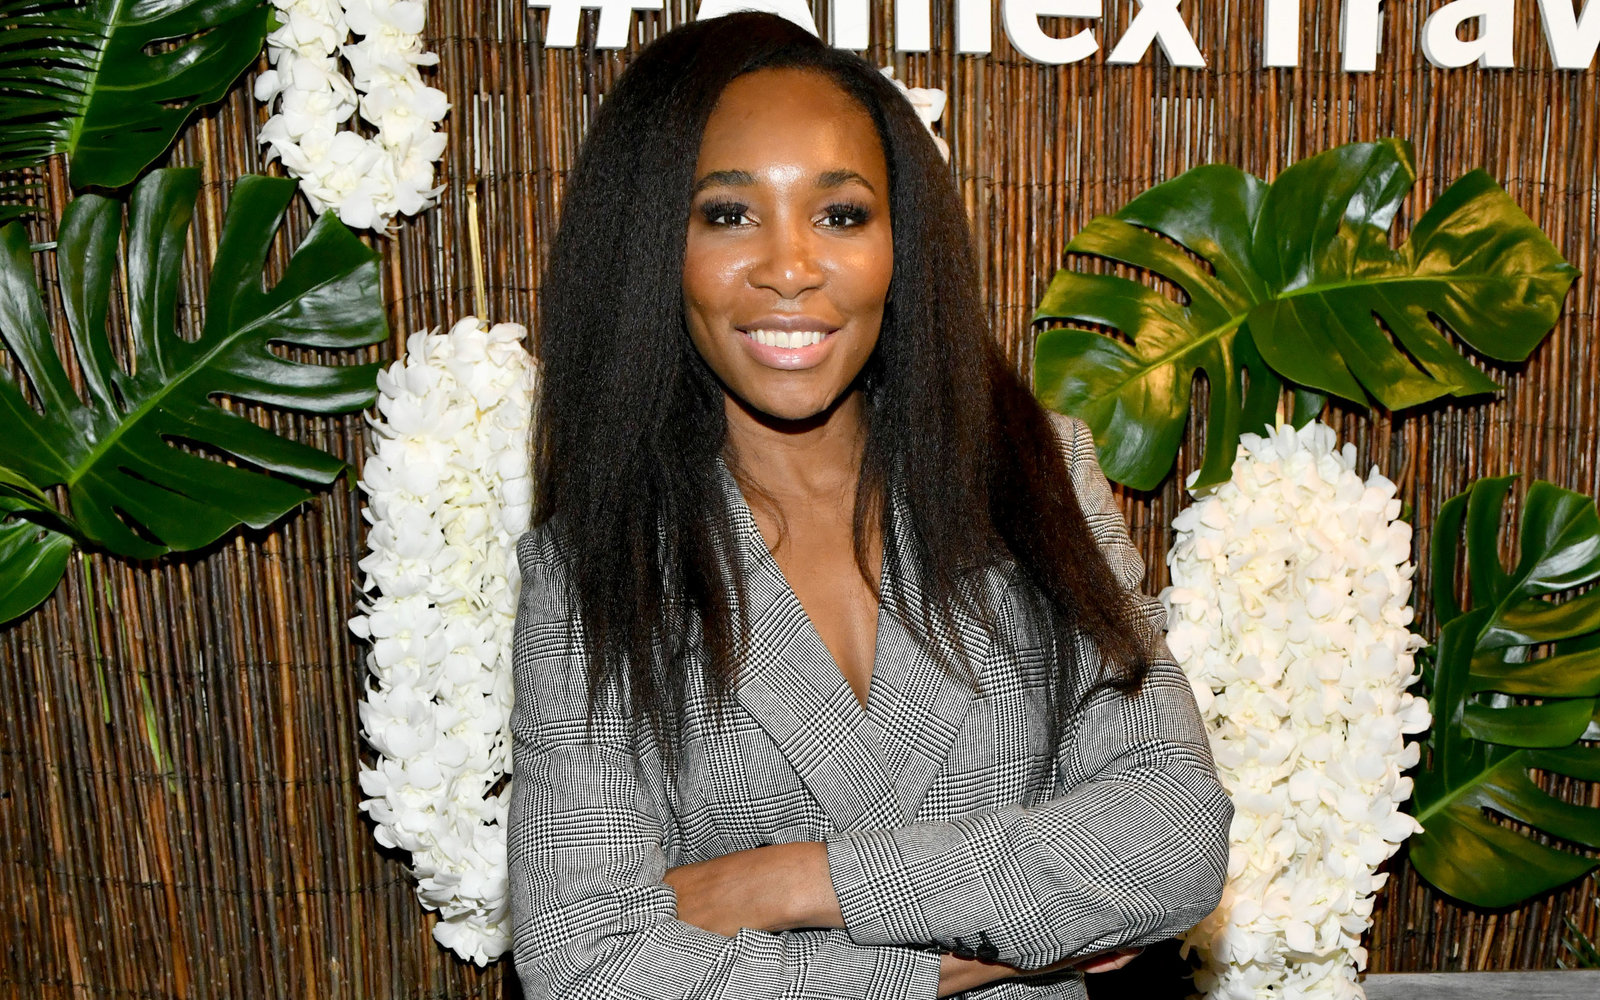 NEW YORK, NEW YORK - NOVEMBER 07:  Venus Williams hosts an immersive experience presented by American Express Travel at the Greenwich Hotel on November 7, 2019, in New York City. (Photo by Craig Barritt/Getty Images for American Express)